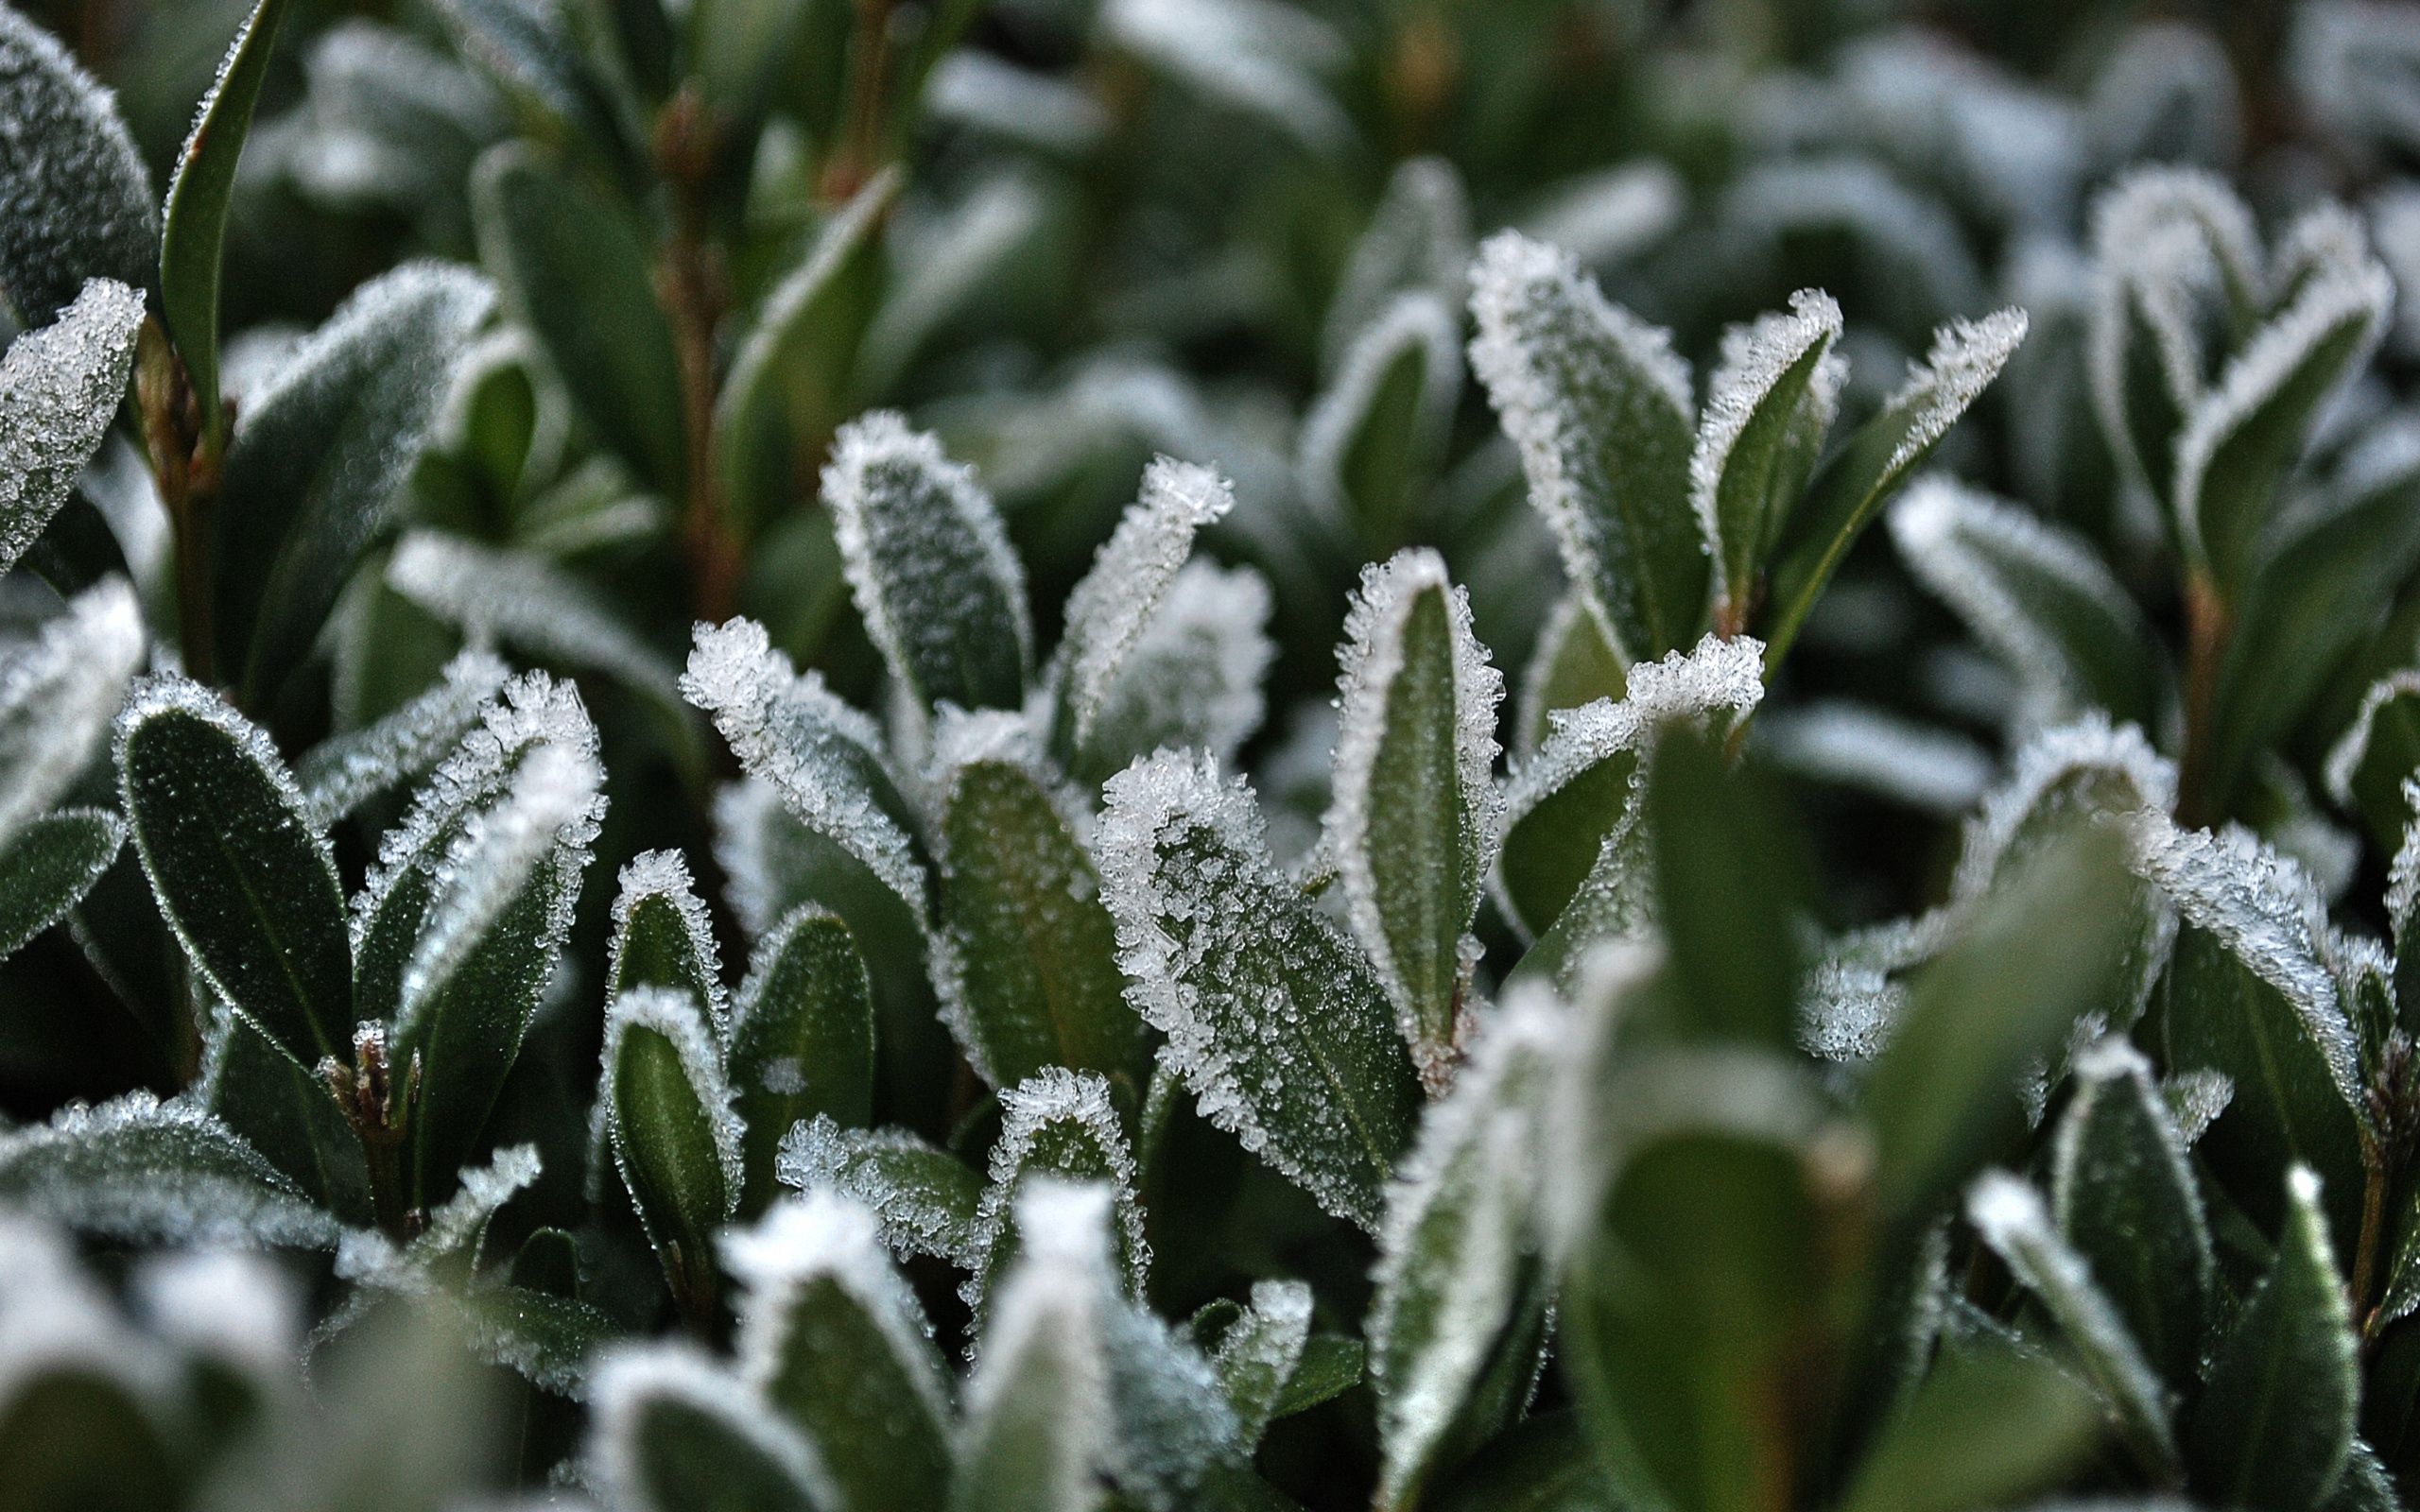 53250 1440x900 PC pictures for free, download frost, hoarfrost, snow, grass 1440x900 wallpapers on your desktop